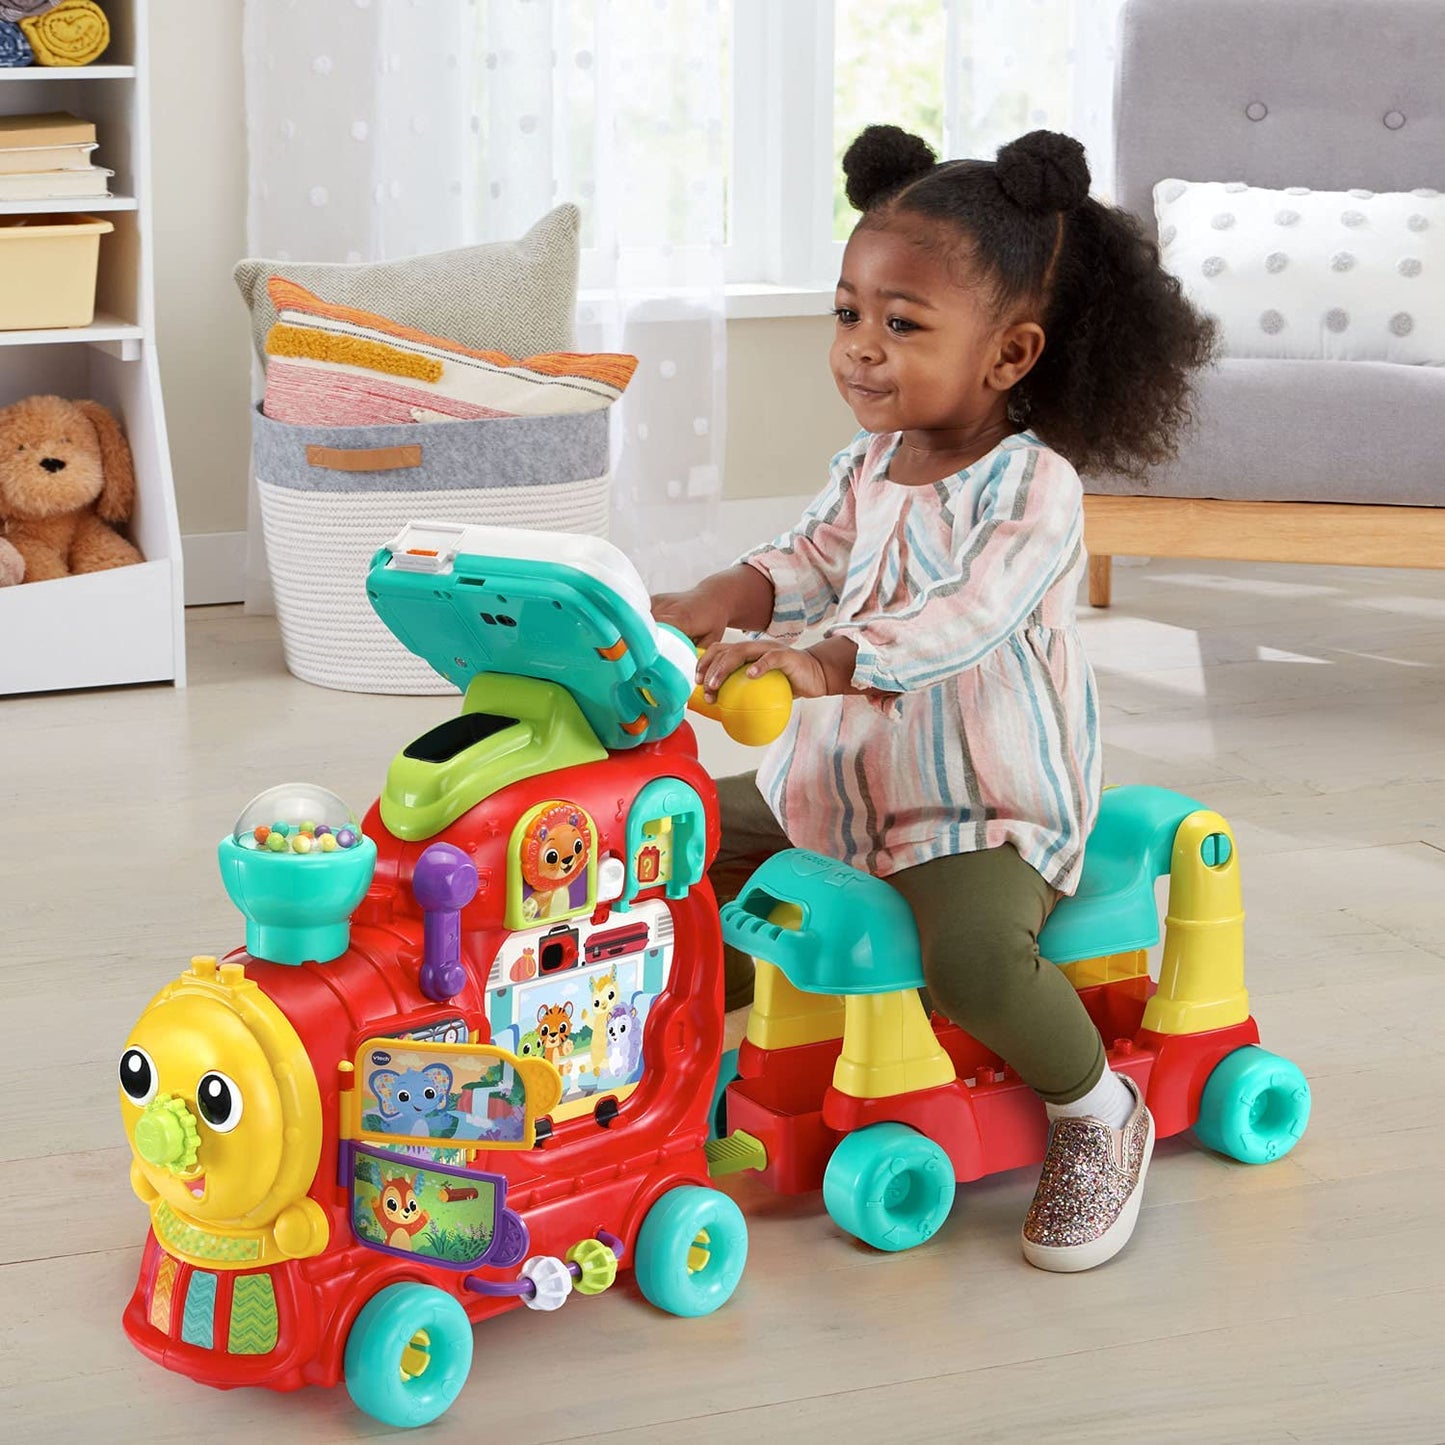 VTech 4-in-1 Letter Learning Train - Red